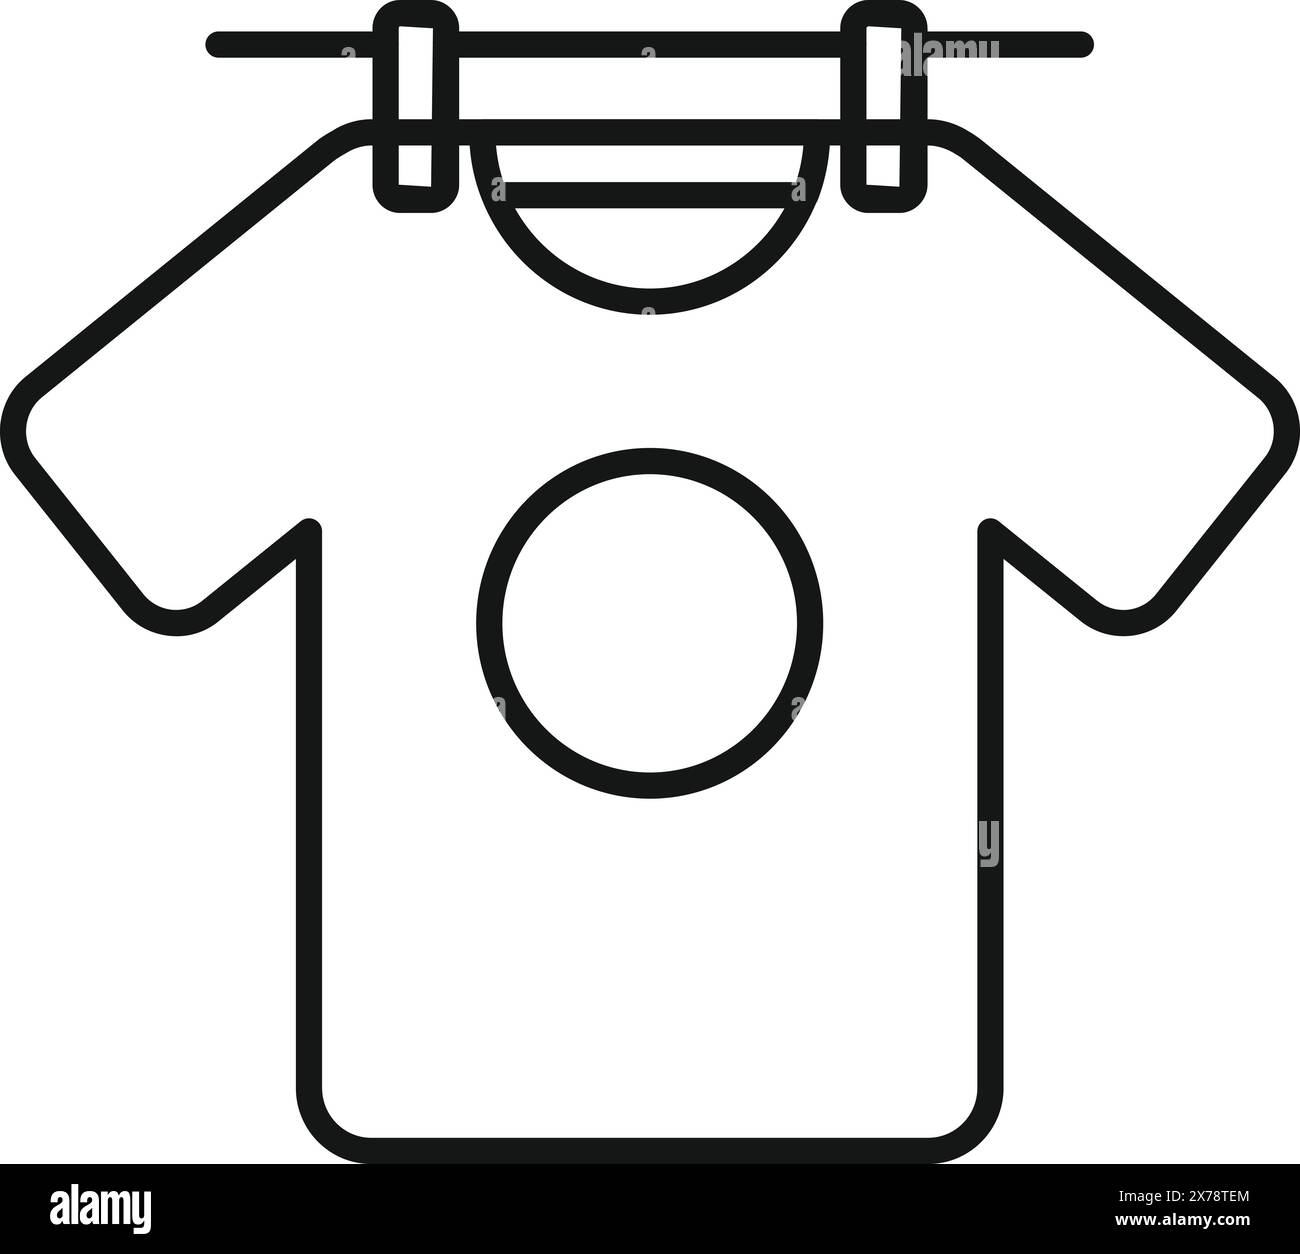 Minimalist black and white vector illustration of a tshirt hanging on a clothesline, representing the ecofriendly and simple act of linedrying clothing for freshness and care Stock Vector